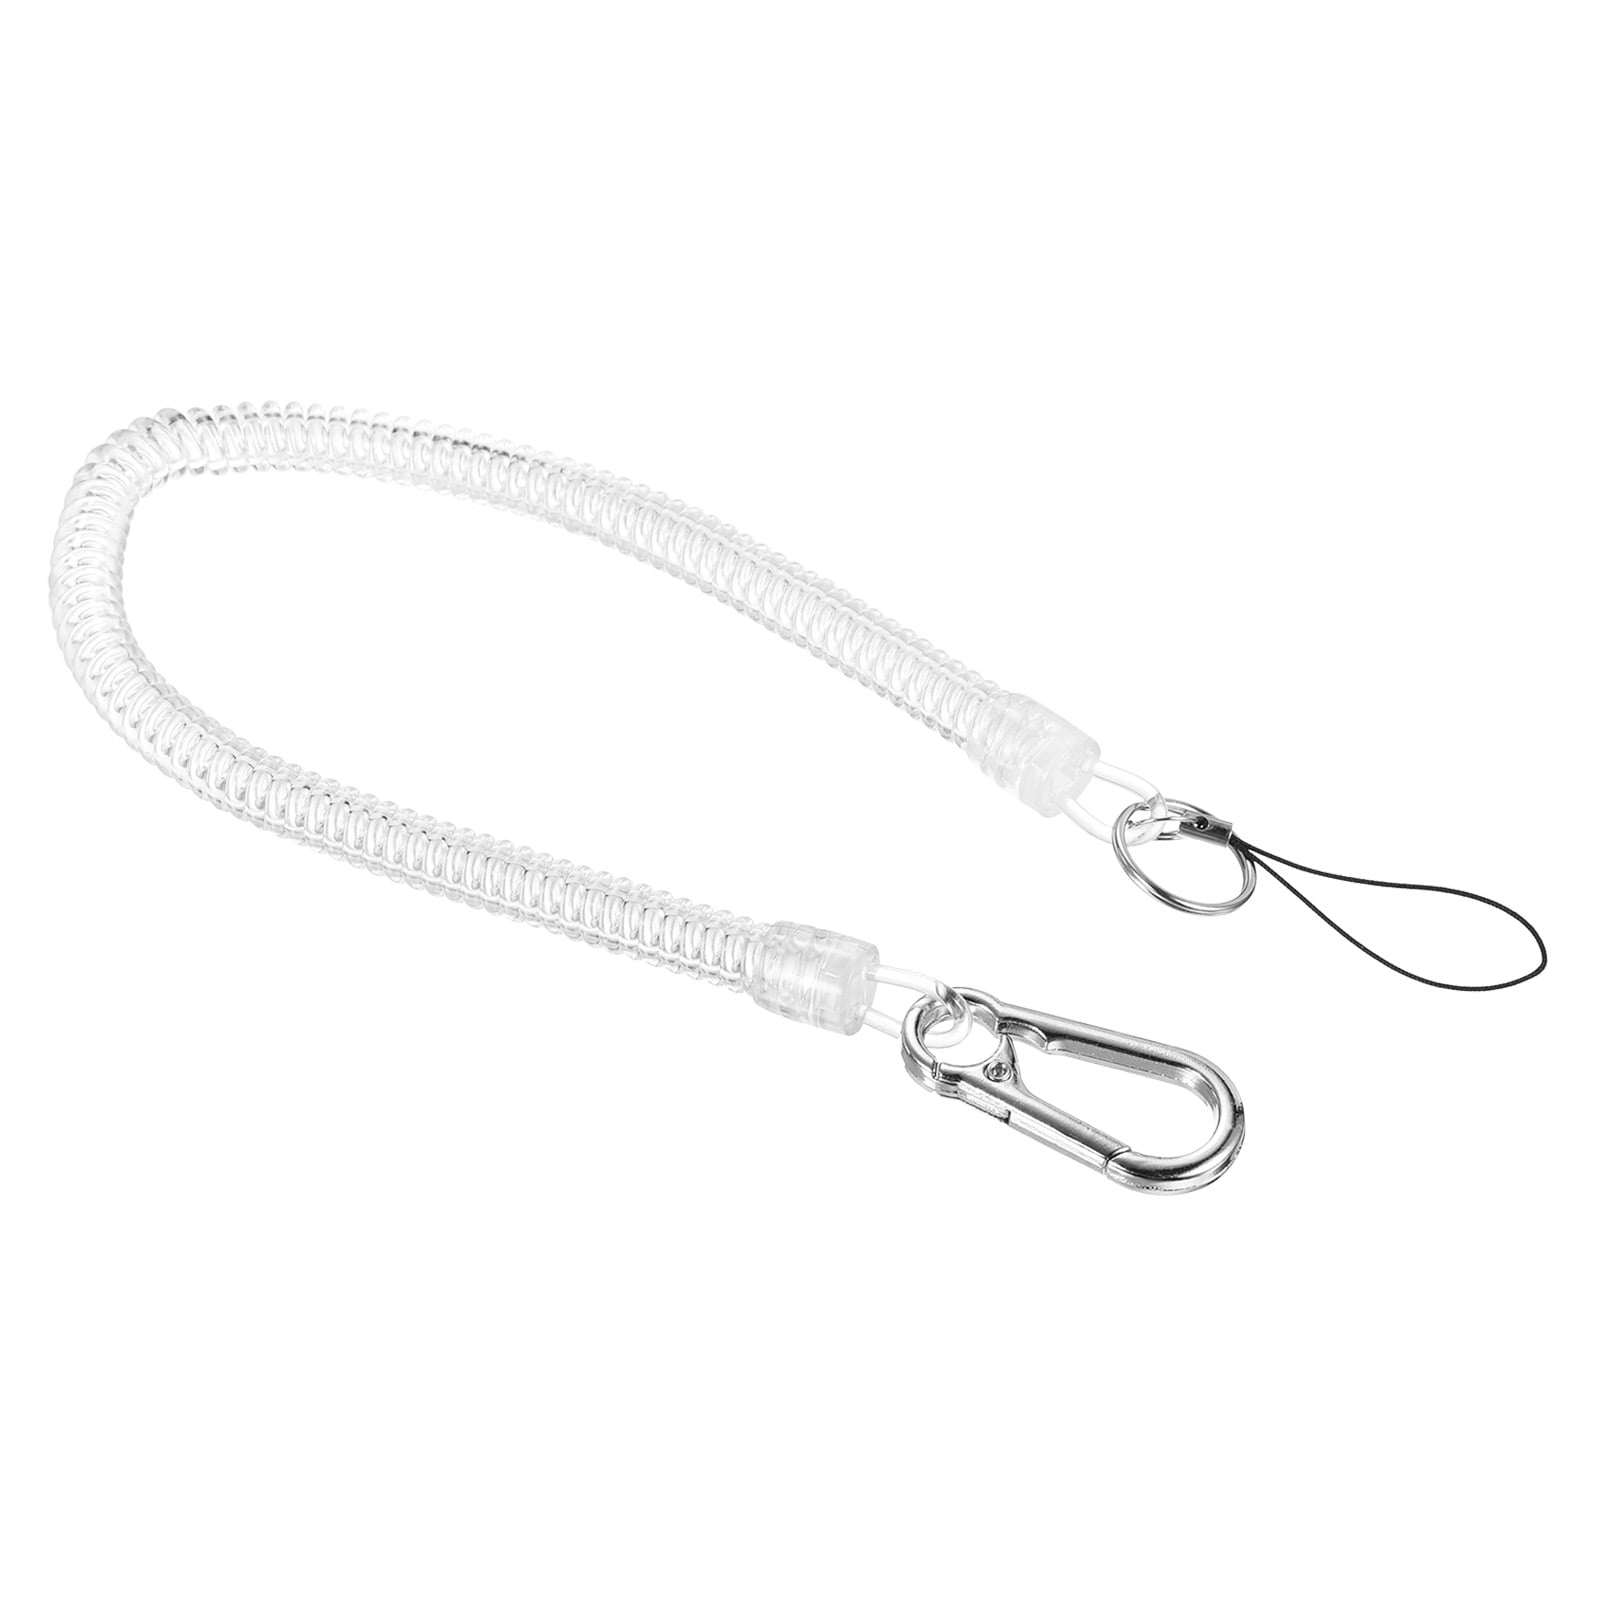 Uxcell Retractable Coil Spring Keychain Clasp with Big Key Ring 380mm, 1  Pack Plastic Spiral Stretchy Cord, Clear 